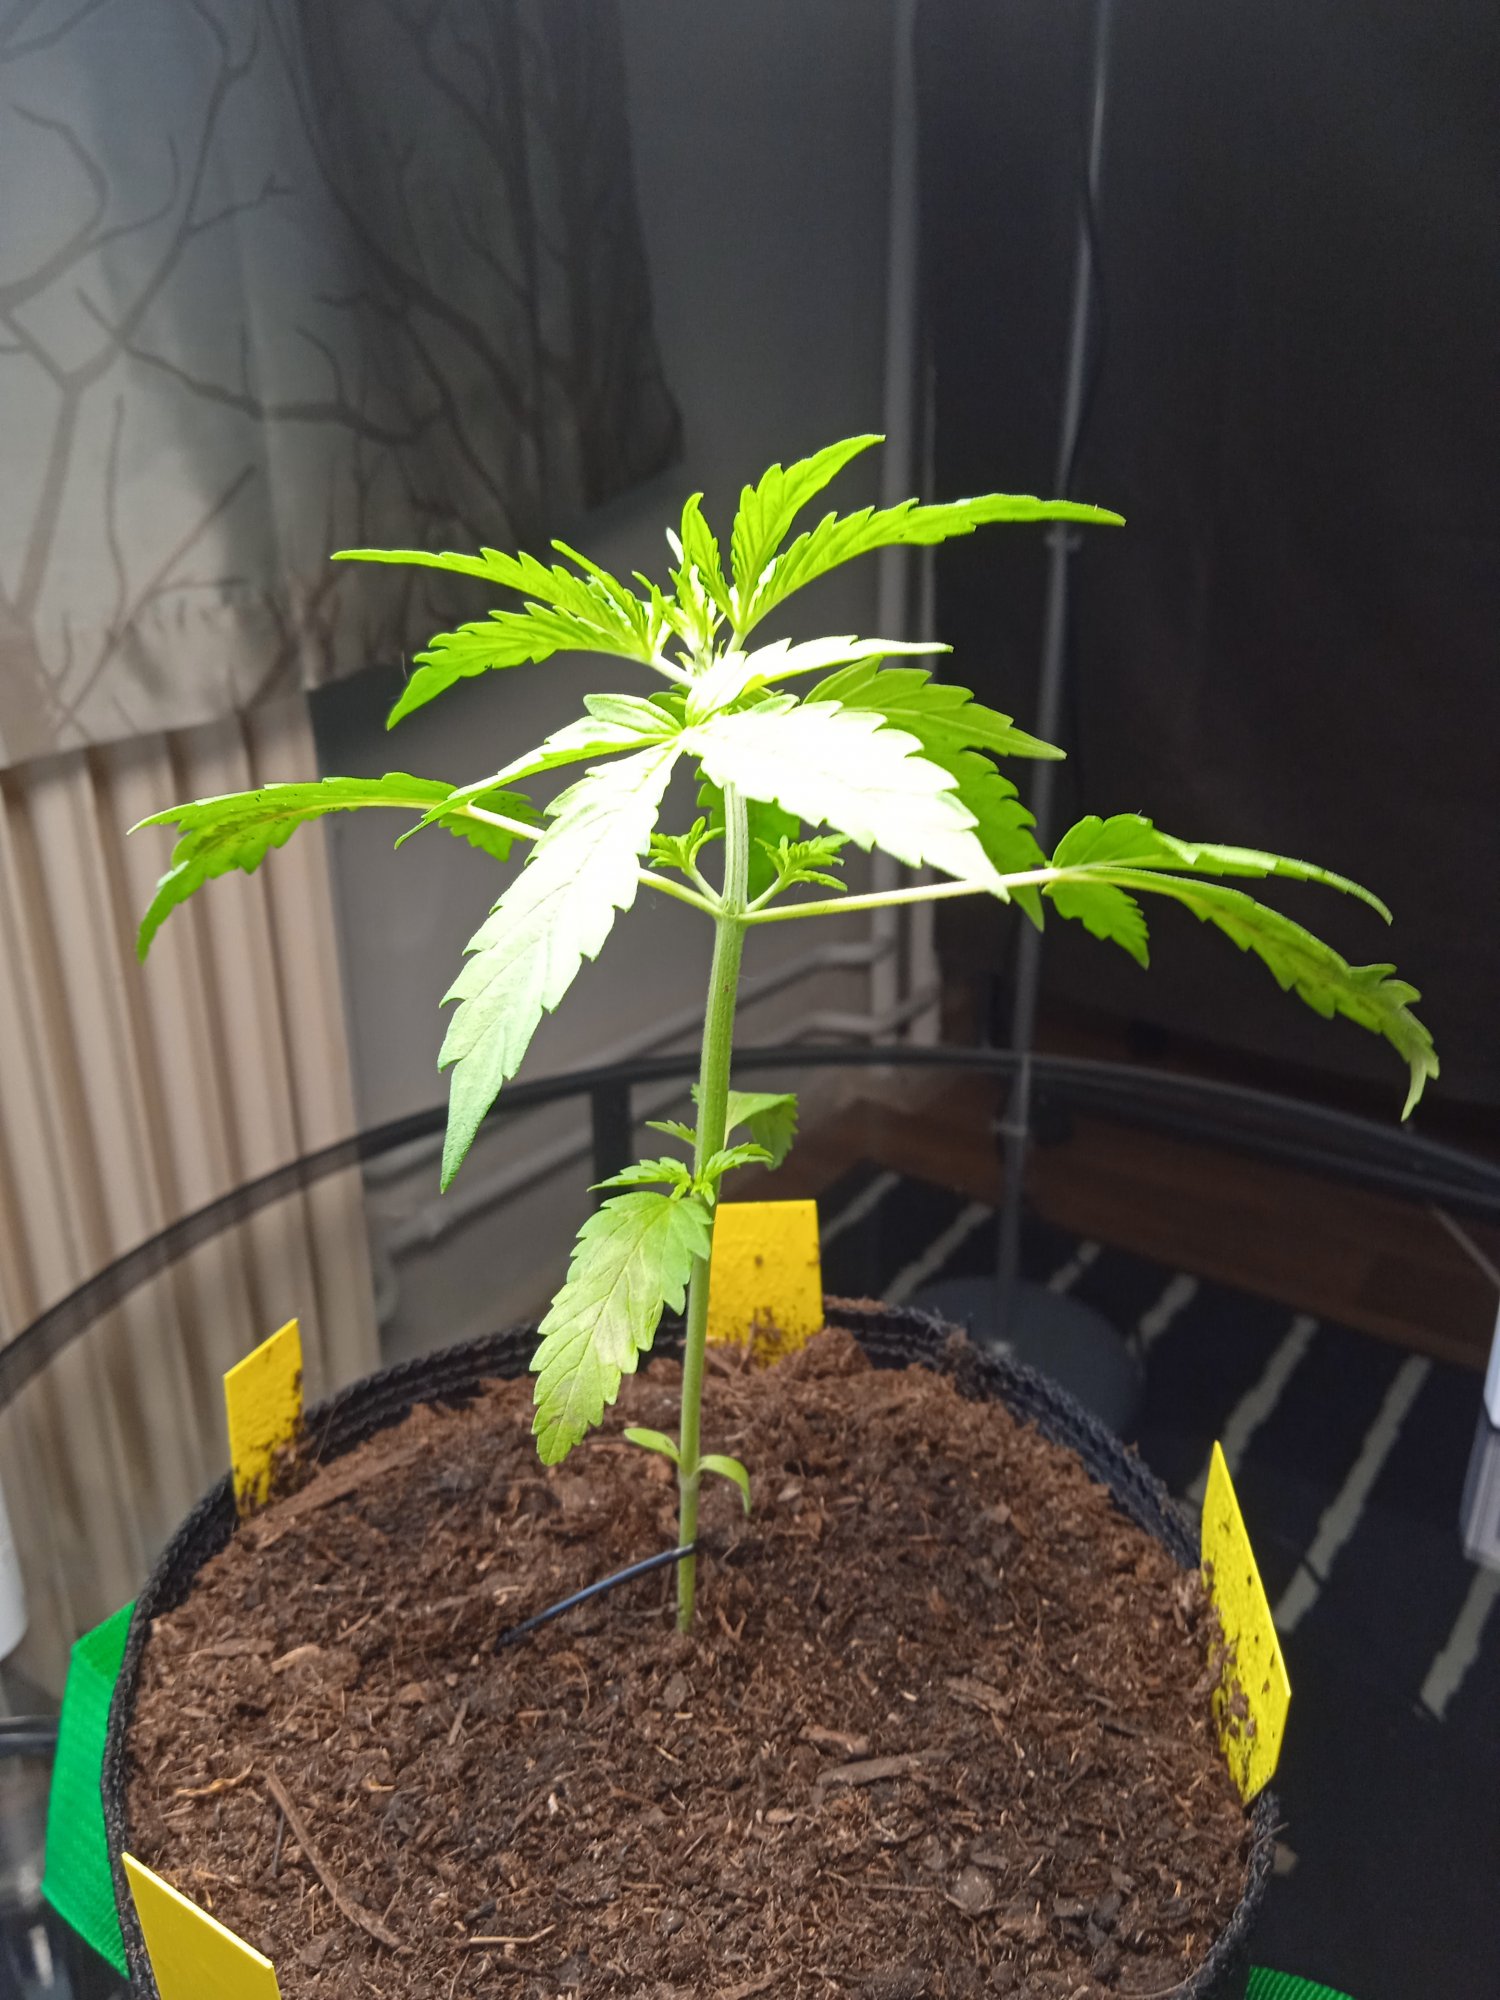 Plant in trouble   pls advice